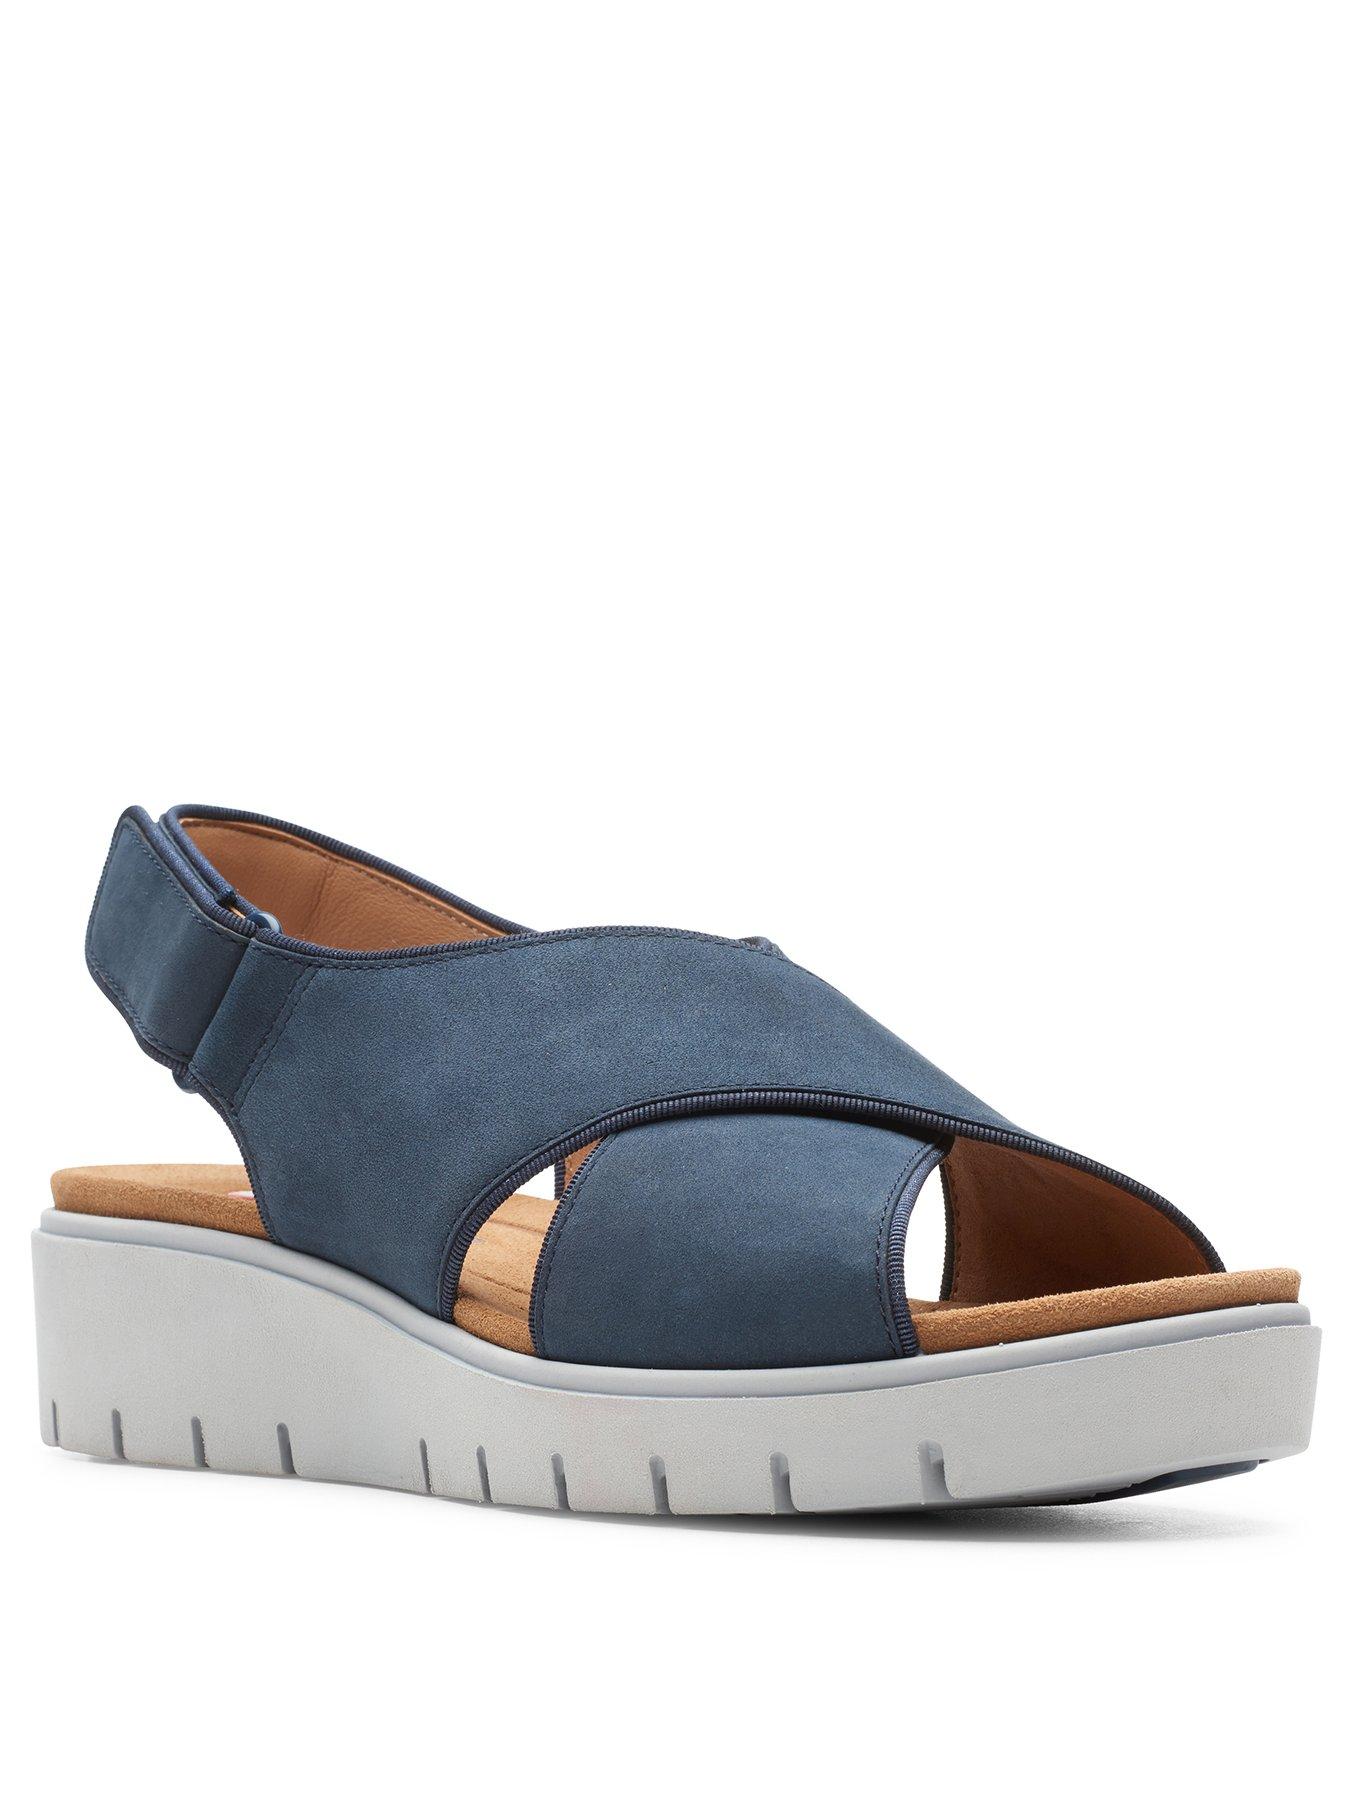 clarks wedge shoes sale